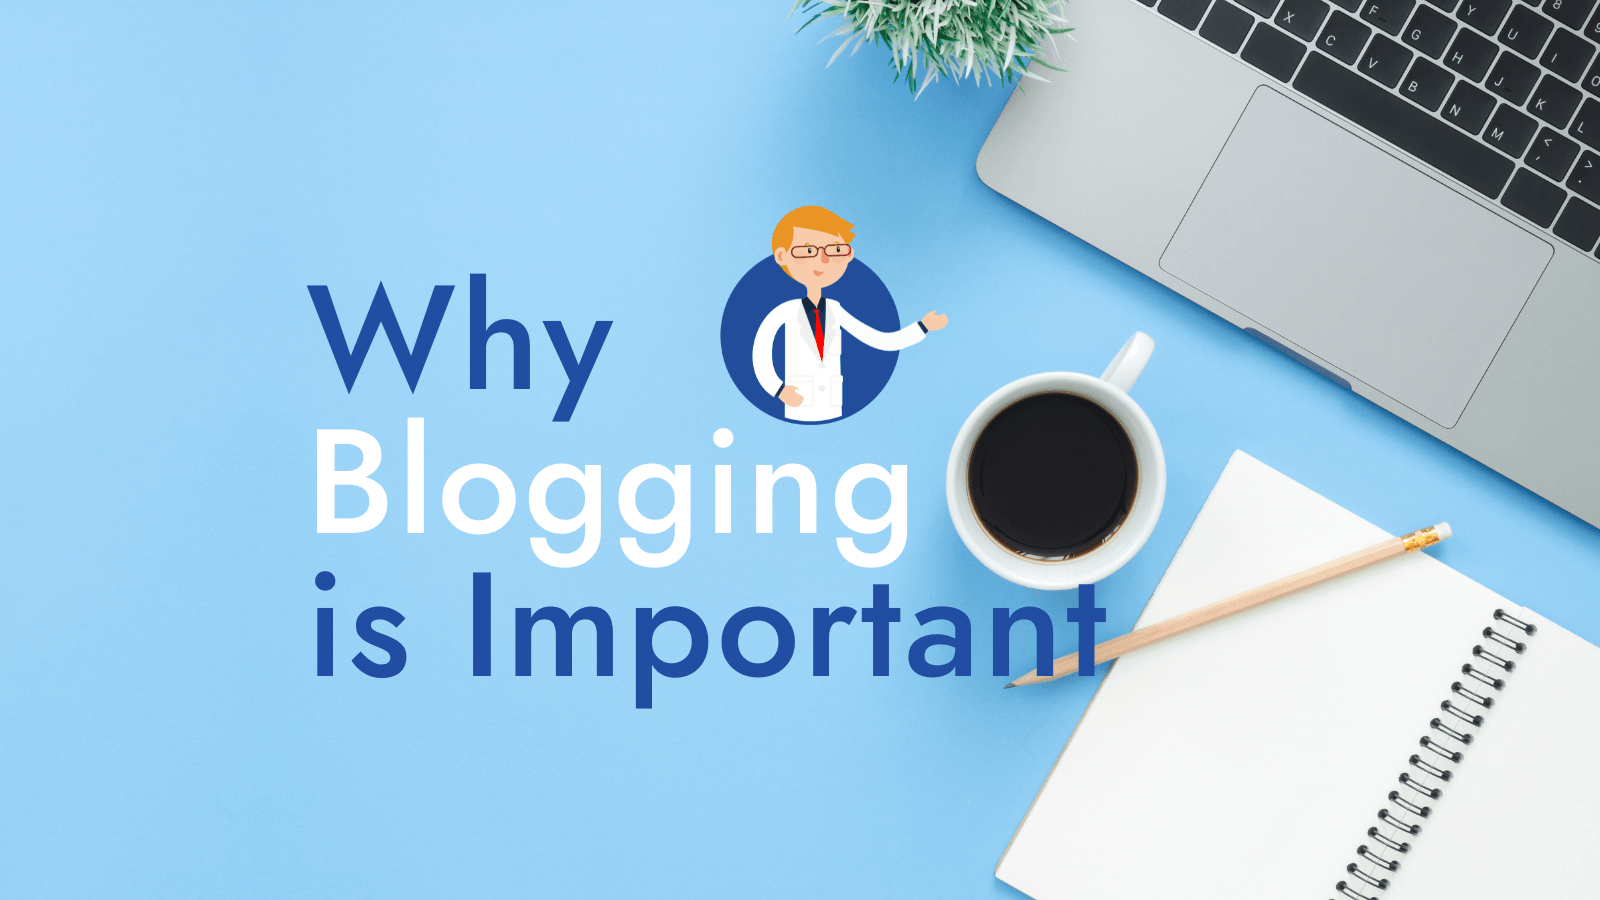 Blogging | Blogging Importance |SEO |Traffic | Networking | Opportunities